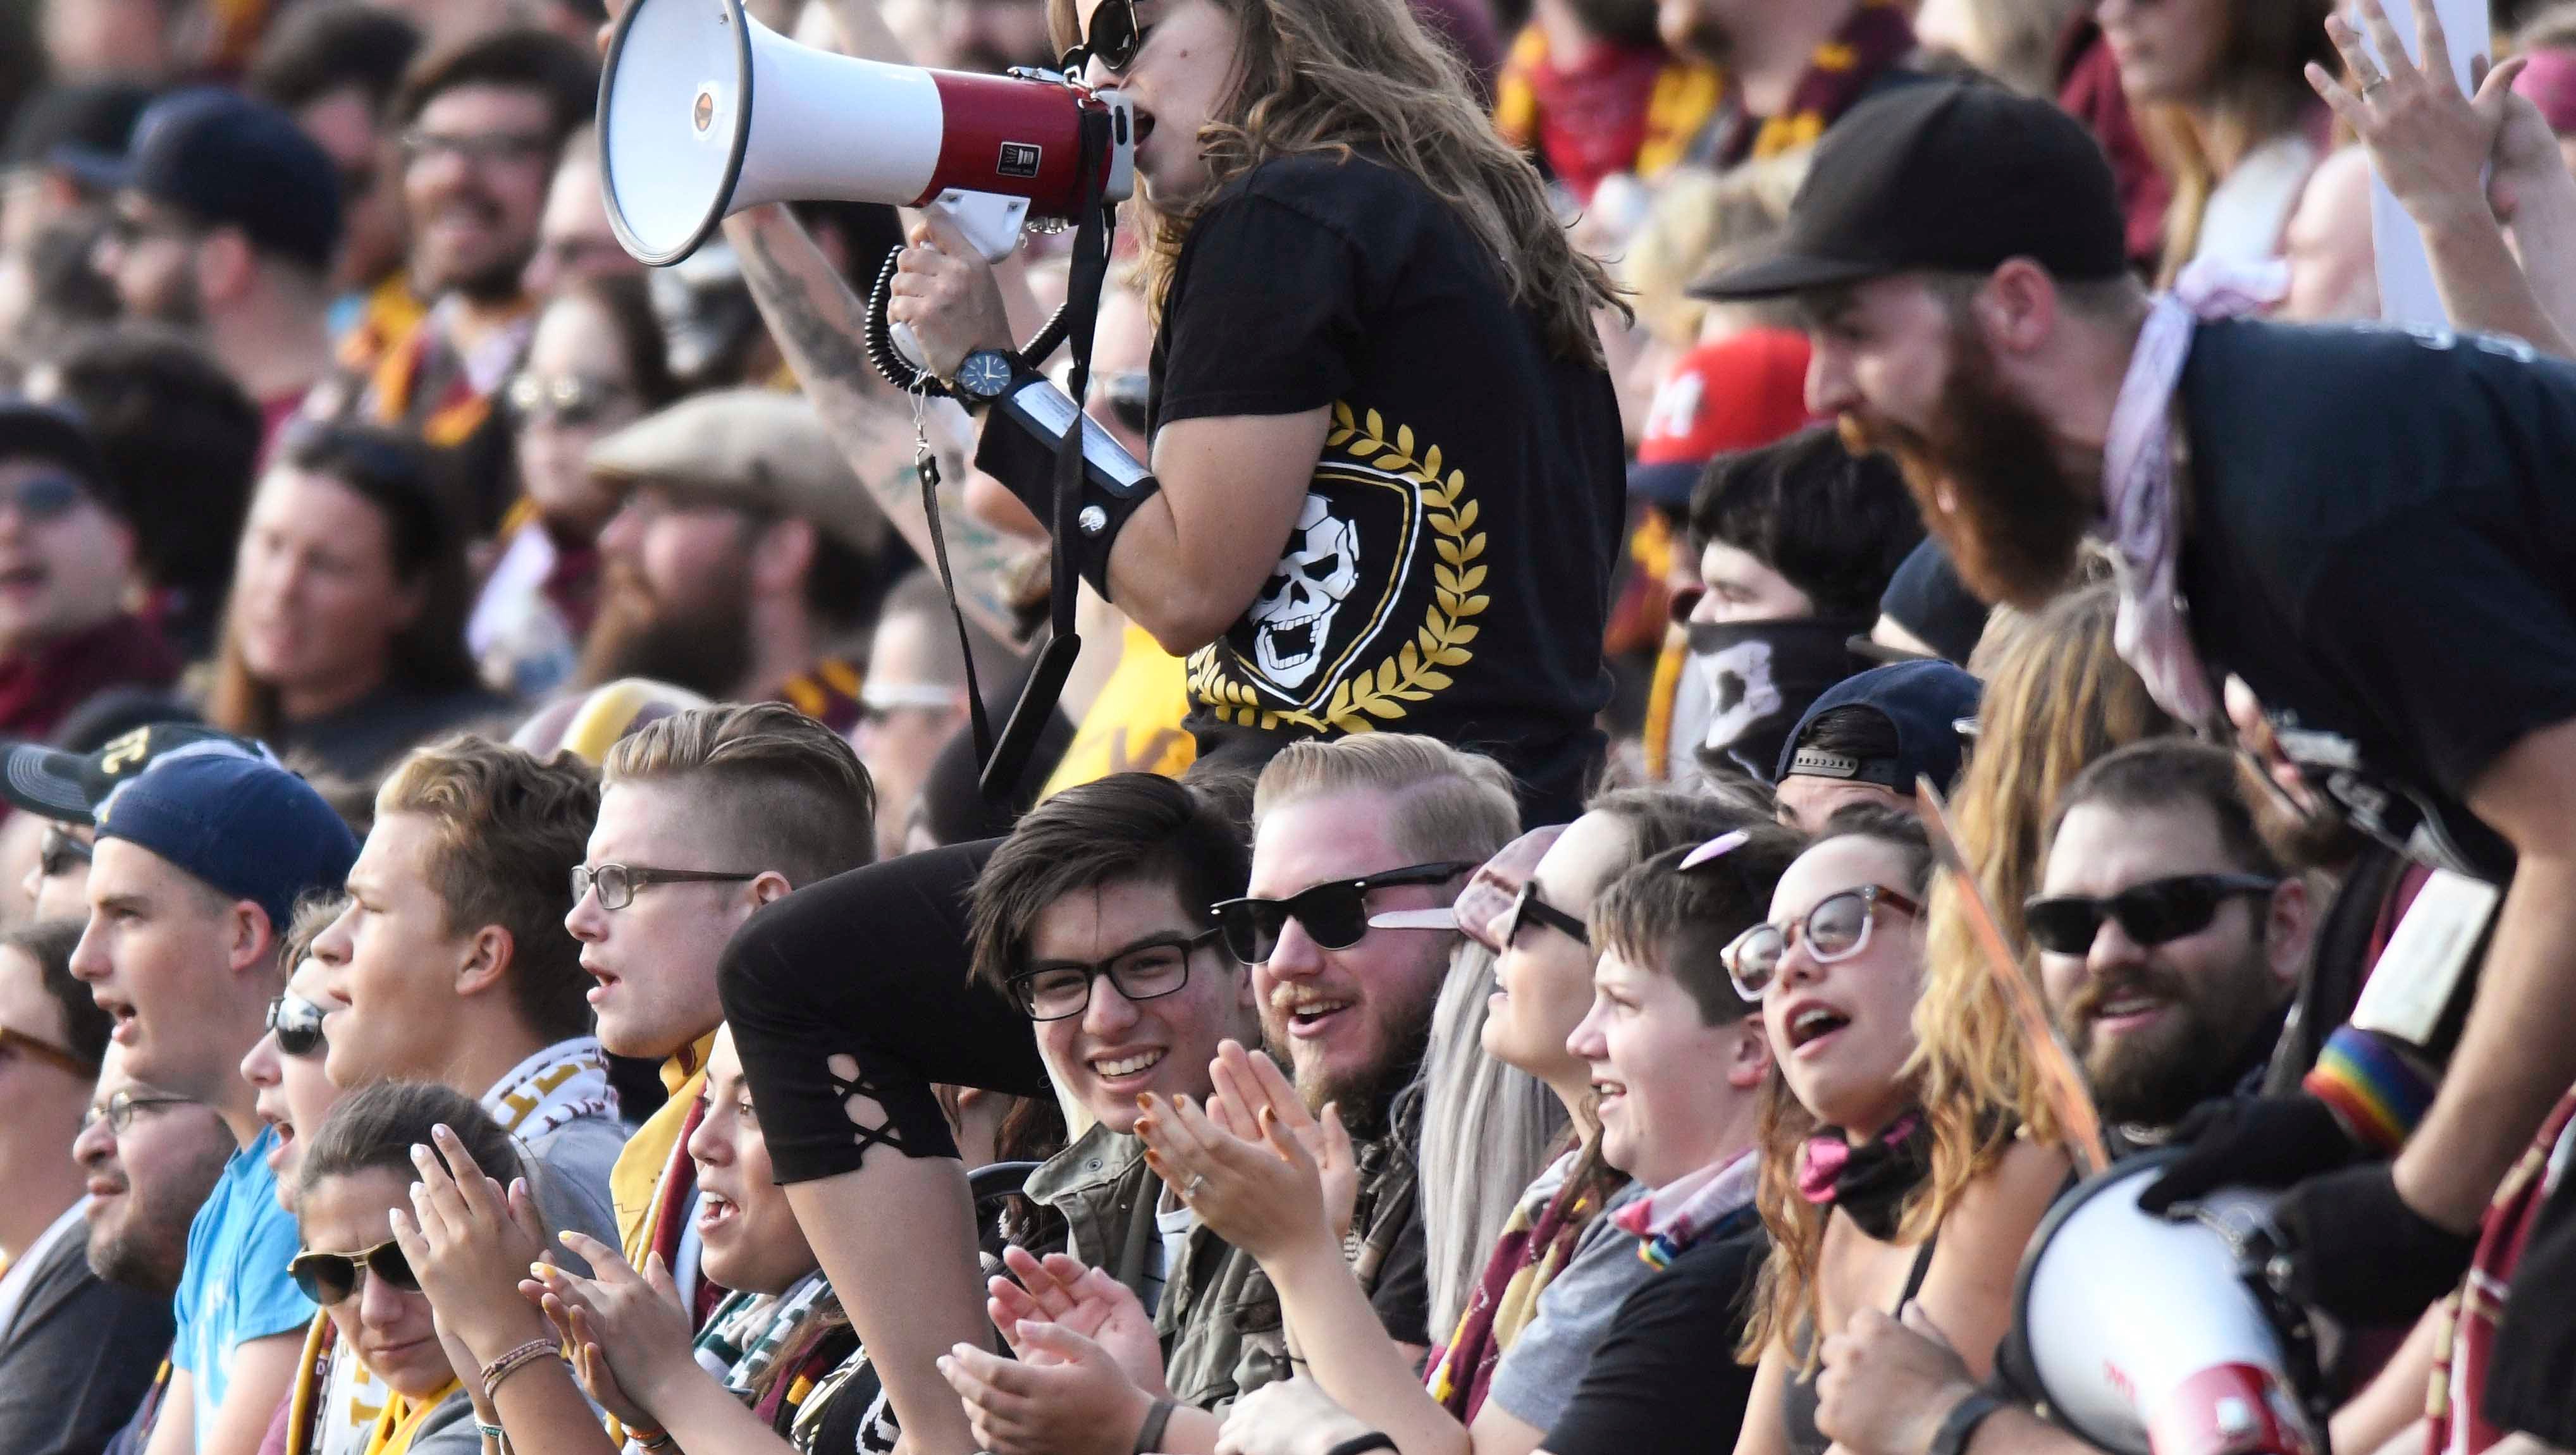 The Detroit City FC-FC St. Pauli match Saturday drew 7,264 fans to Keyworth Stadium and 13,000 viewers on Fox Sports Detroit through its traditional broadcast and live streaming.